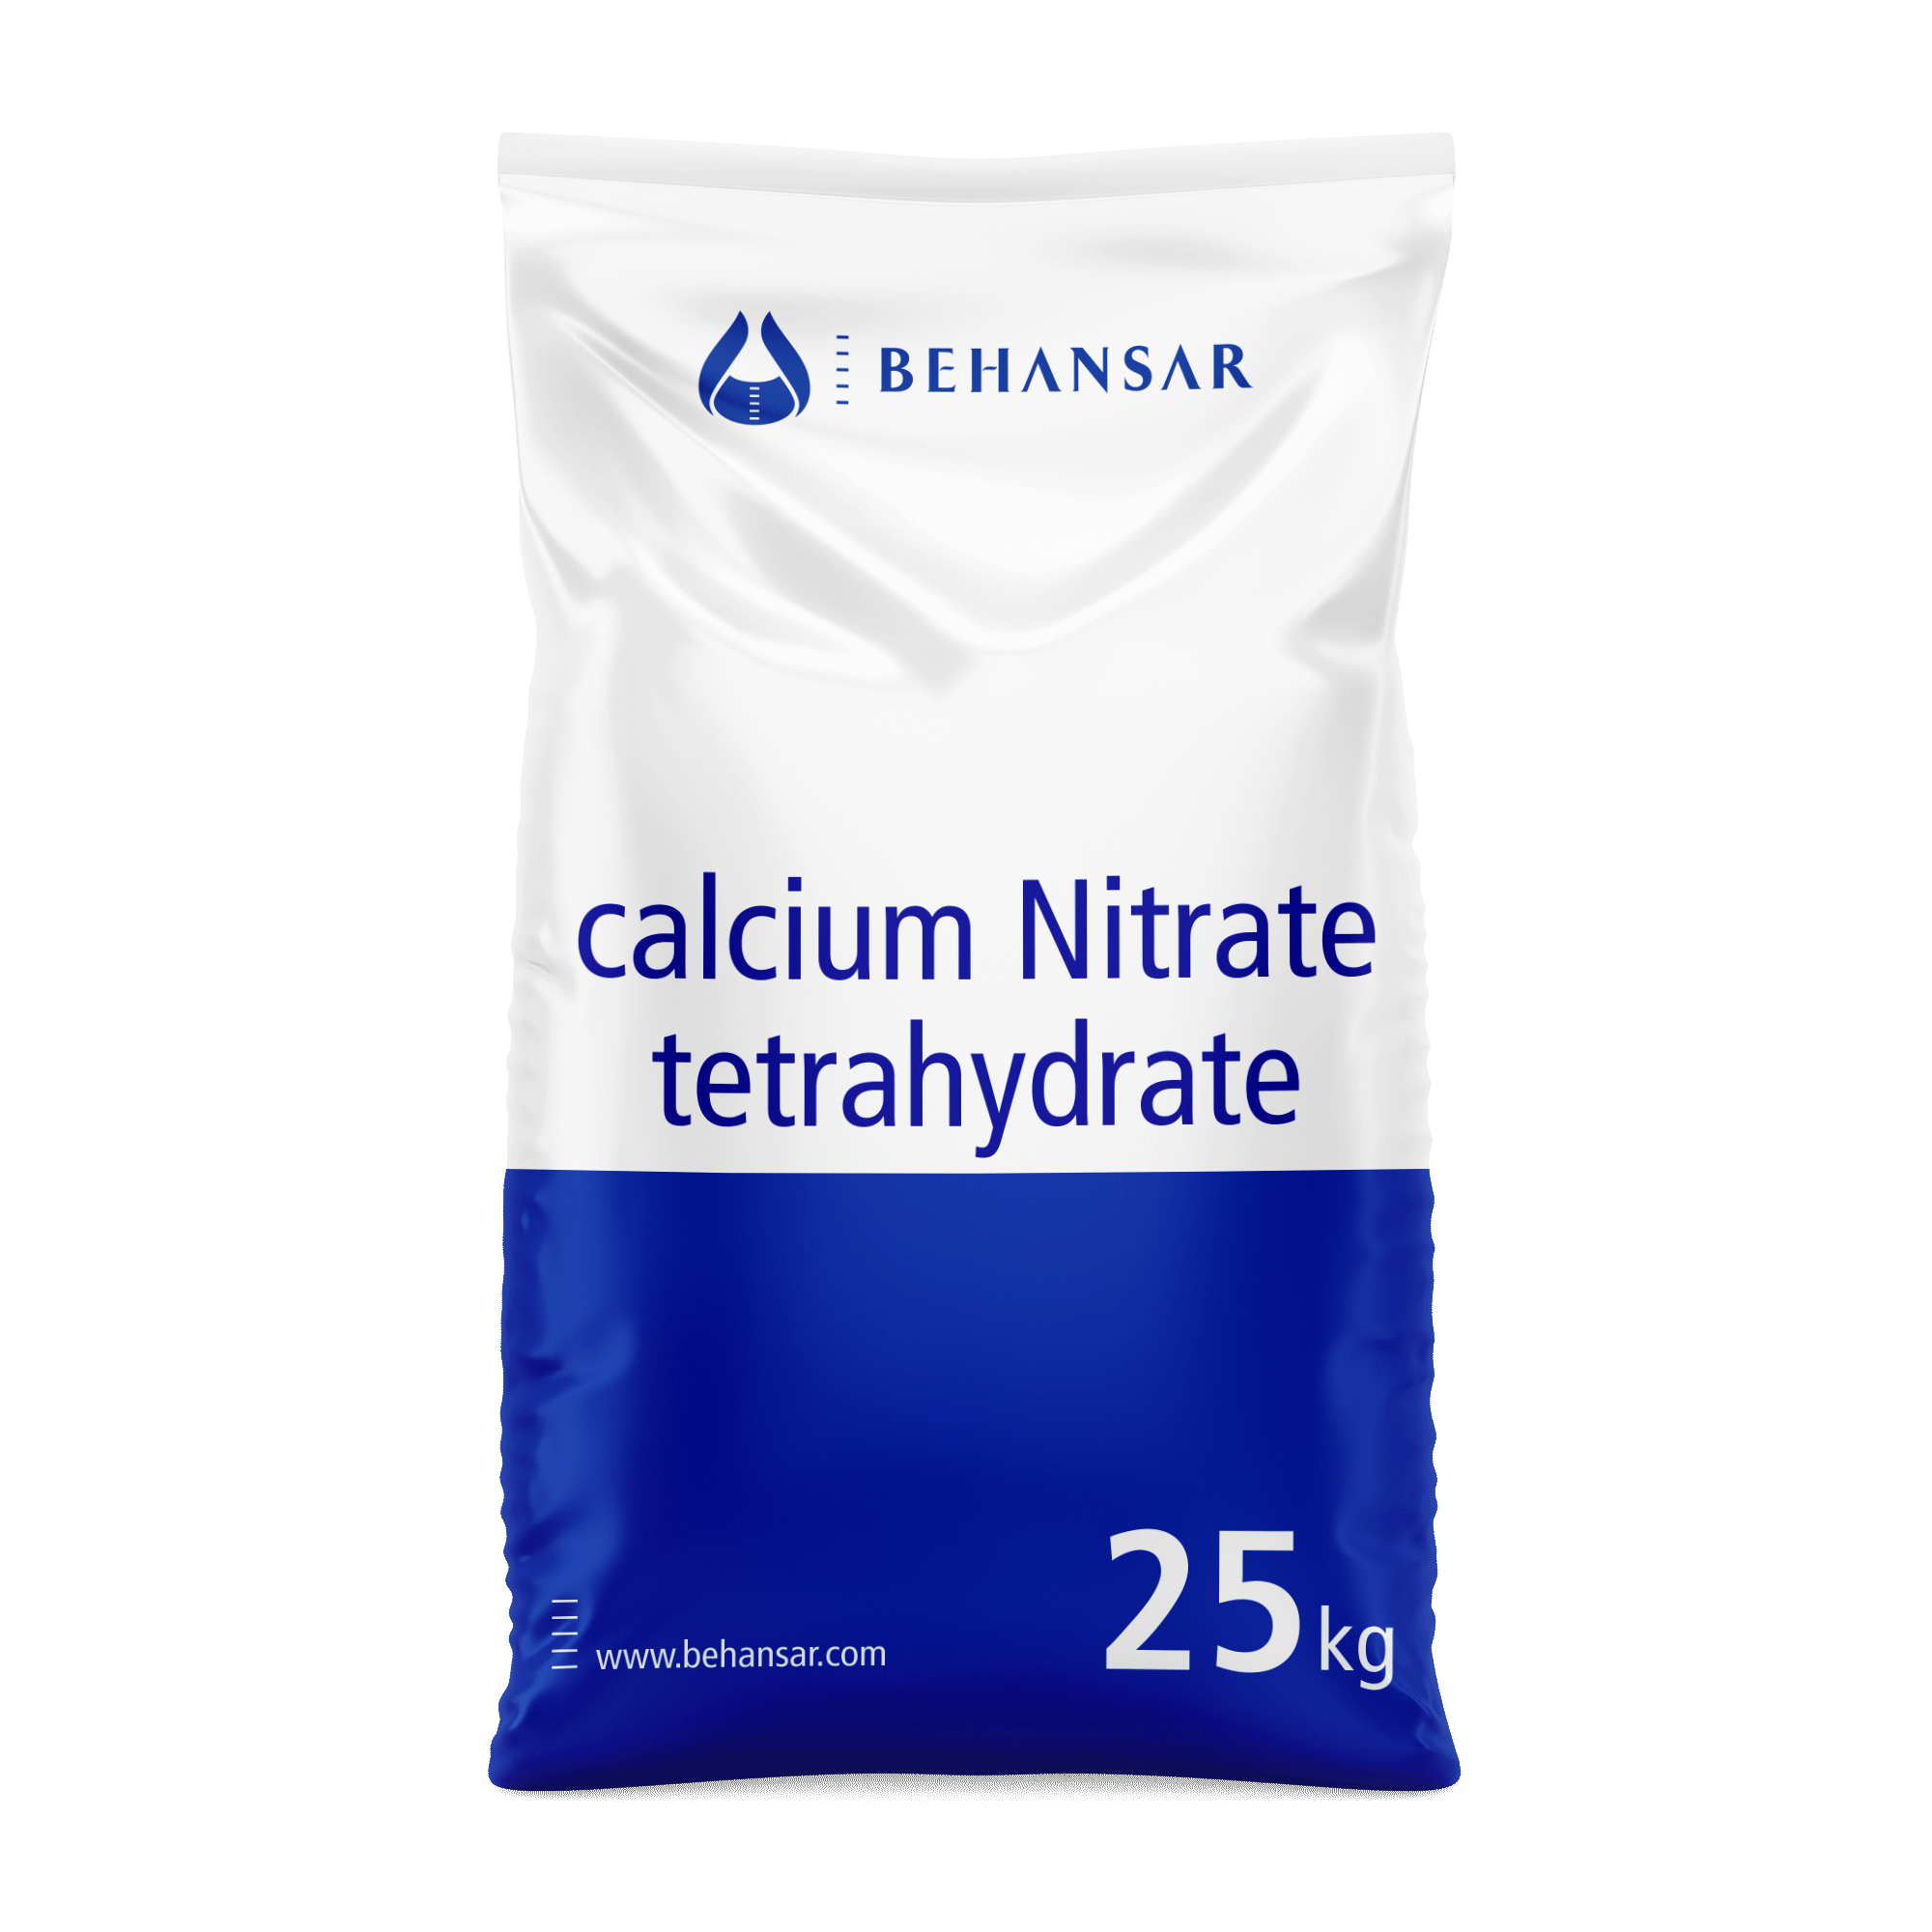 calcium Nitrate tetrahydrate is one of the products of Behansar Co